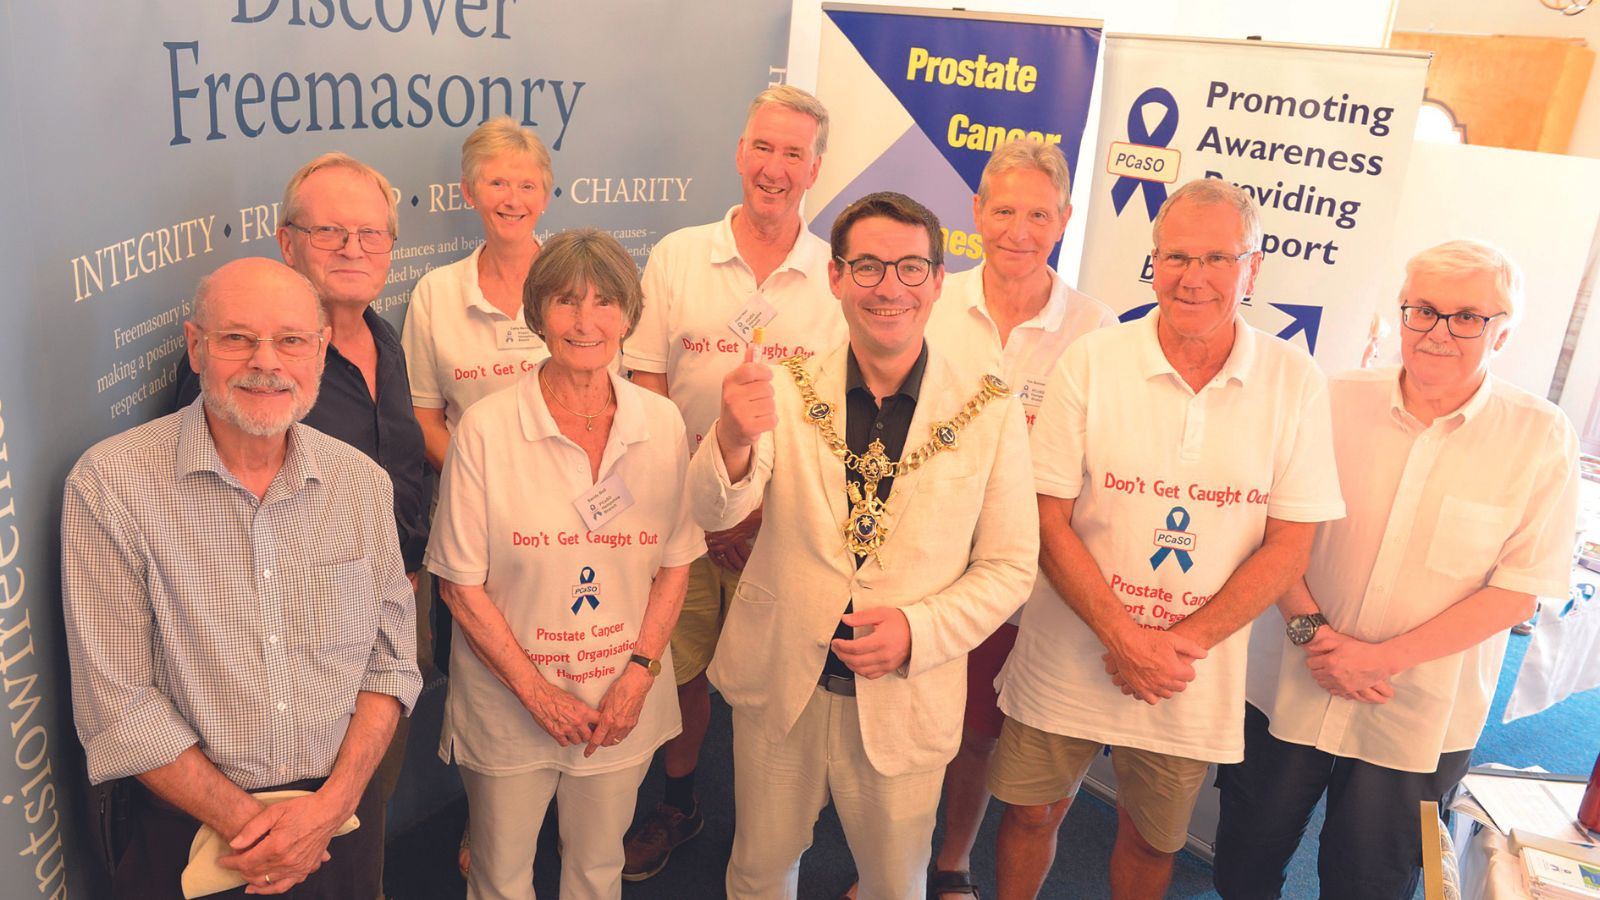 Freemasons from the Portsmouth area held a successful prostate testing day in conjunction with the charity Prostate Cancer Support Organisation (PCaSO). Almost 300 men were tested.